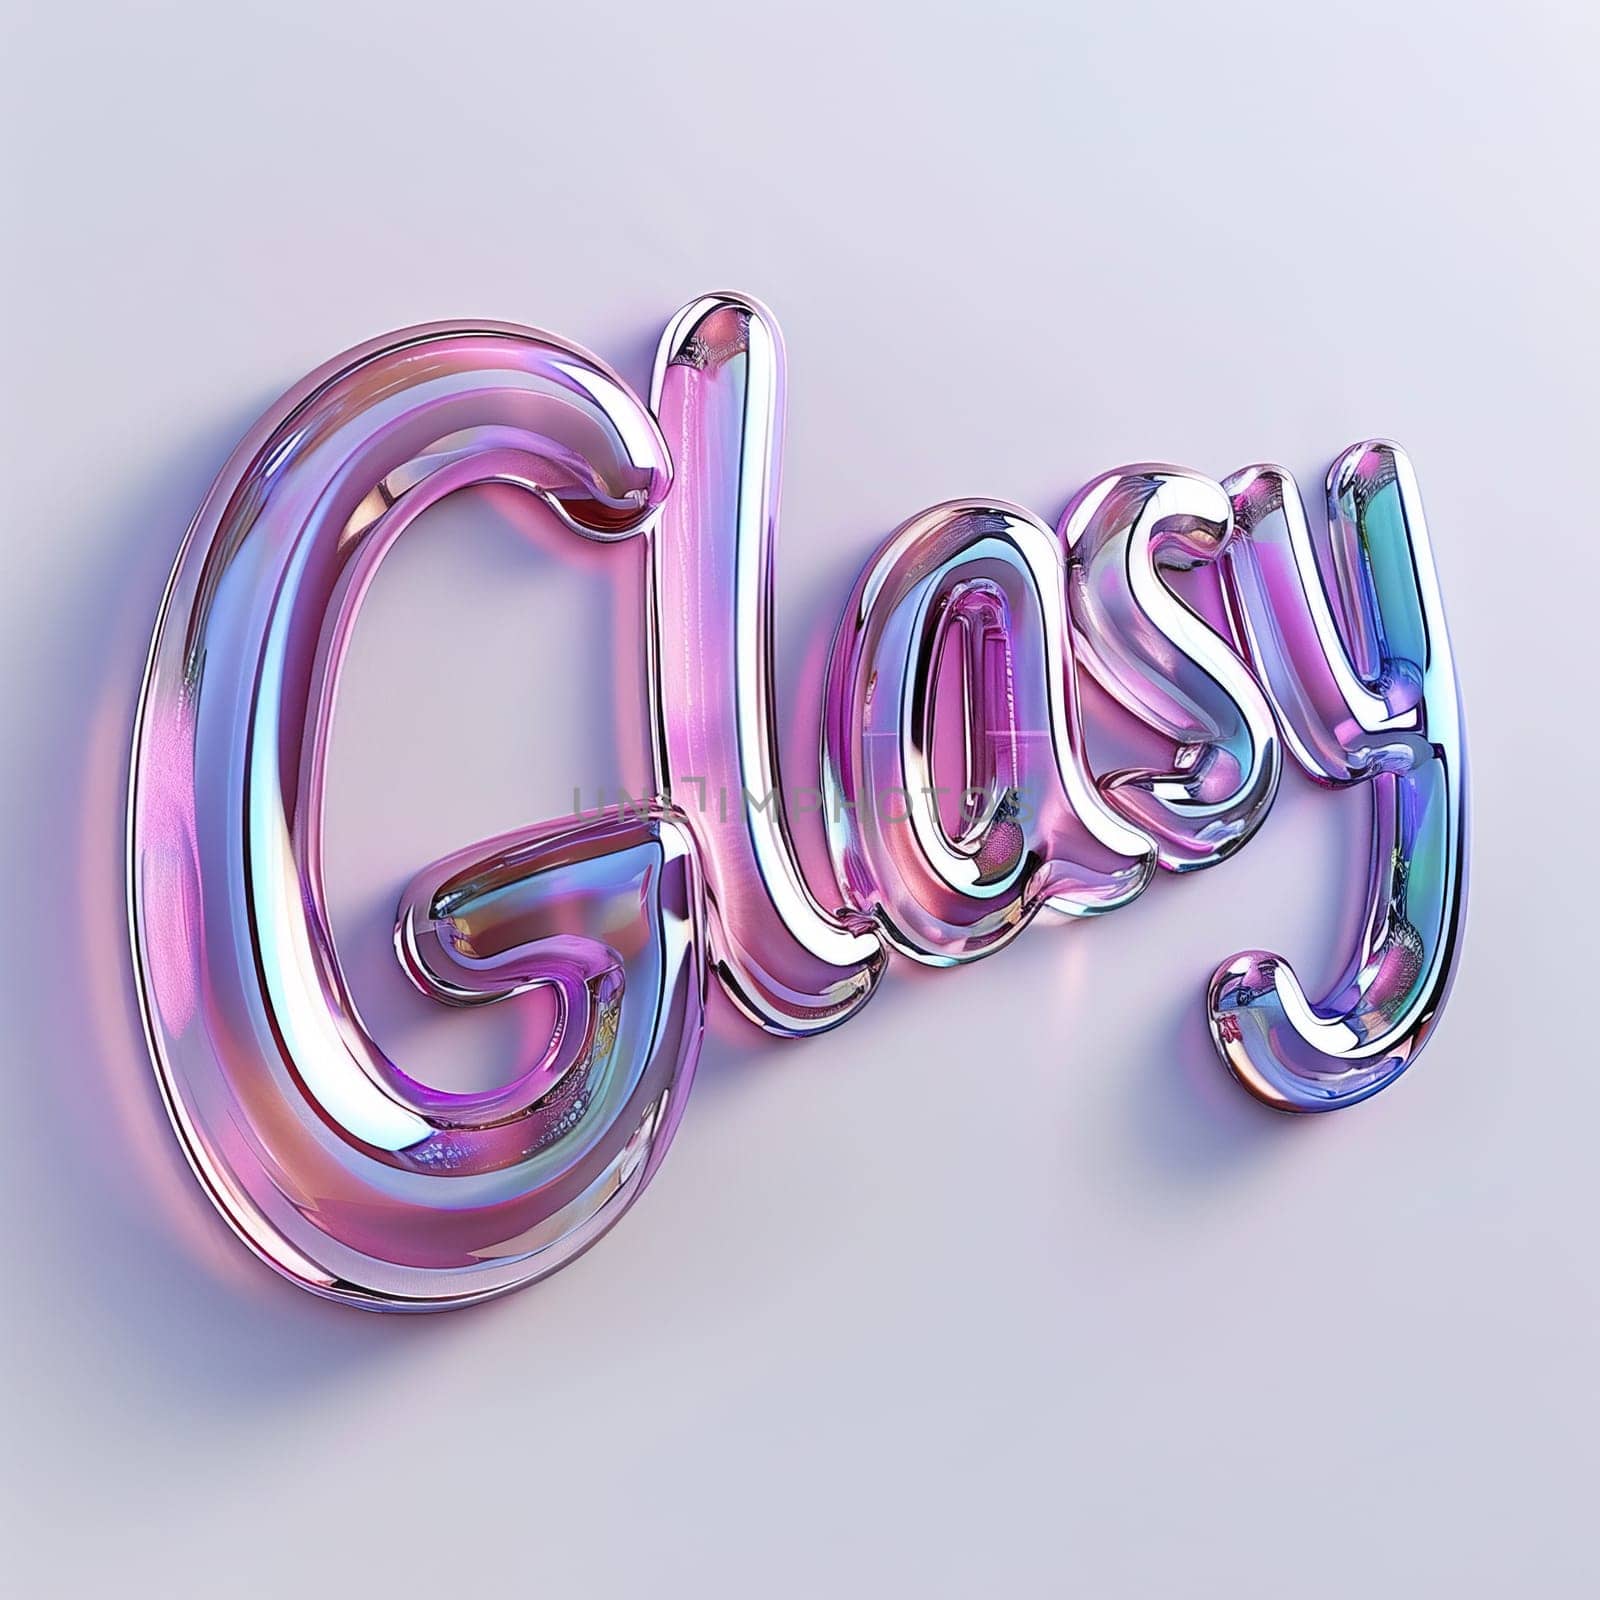 glassy pink and blue Glasy for logo in the style of neumorphism, soft natural lighting, simple and elegant space, close-up, super high detaill